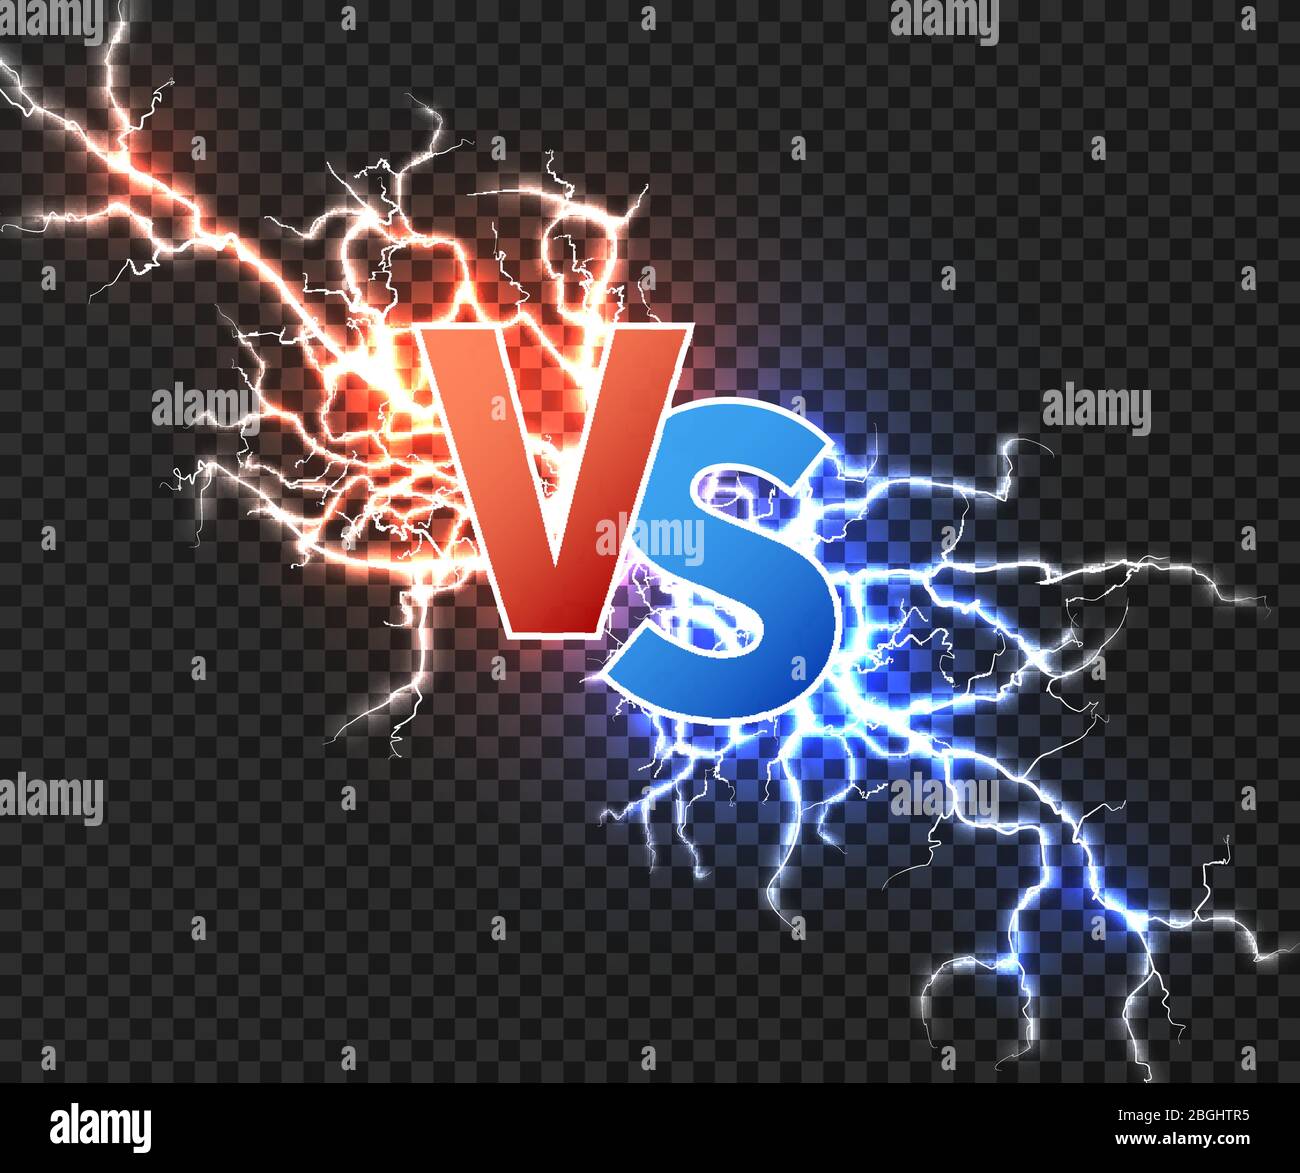 Versus concept with collision of two electric discharge. Vs vector background with power explosion of lightning isolated. Illustration of battle challenge collision Stock Vector